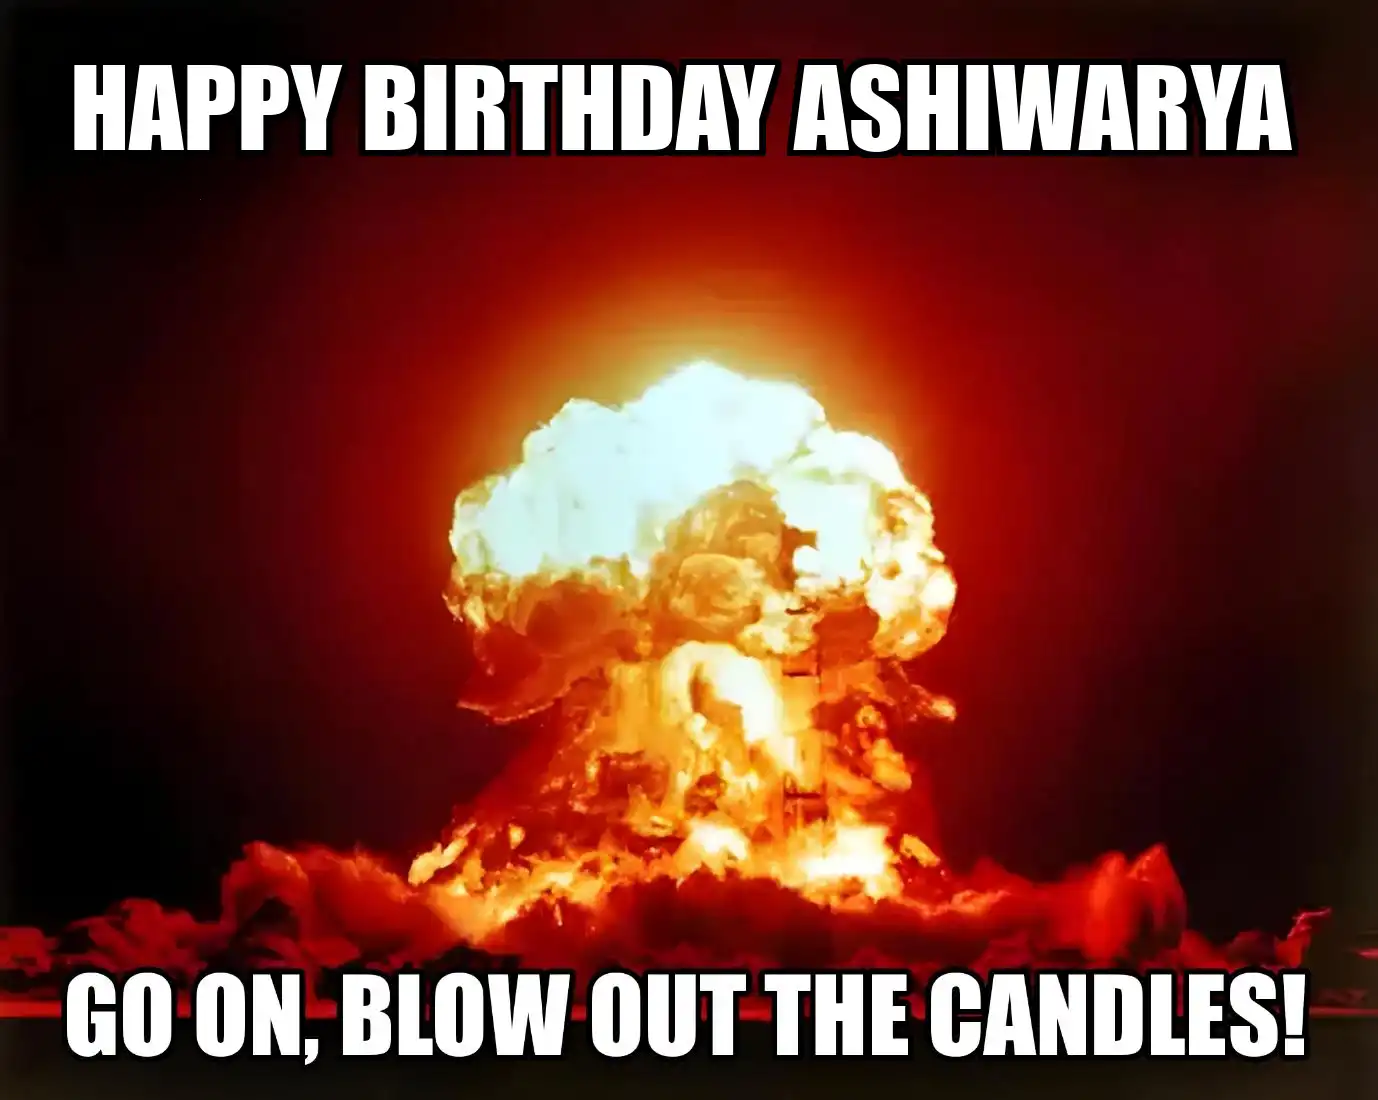 Happy Birthday Ashiwarya Go On Blow Out The Candles Meme